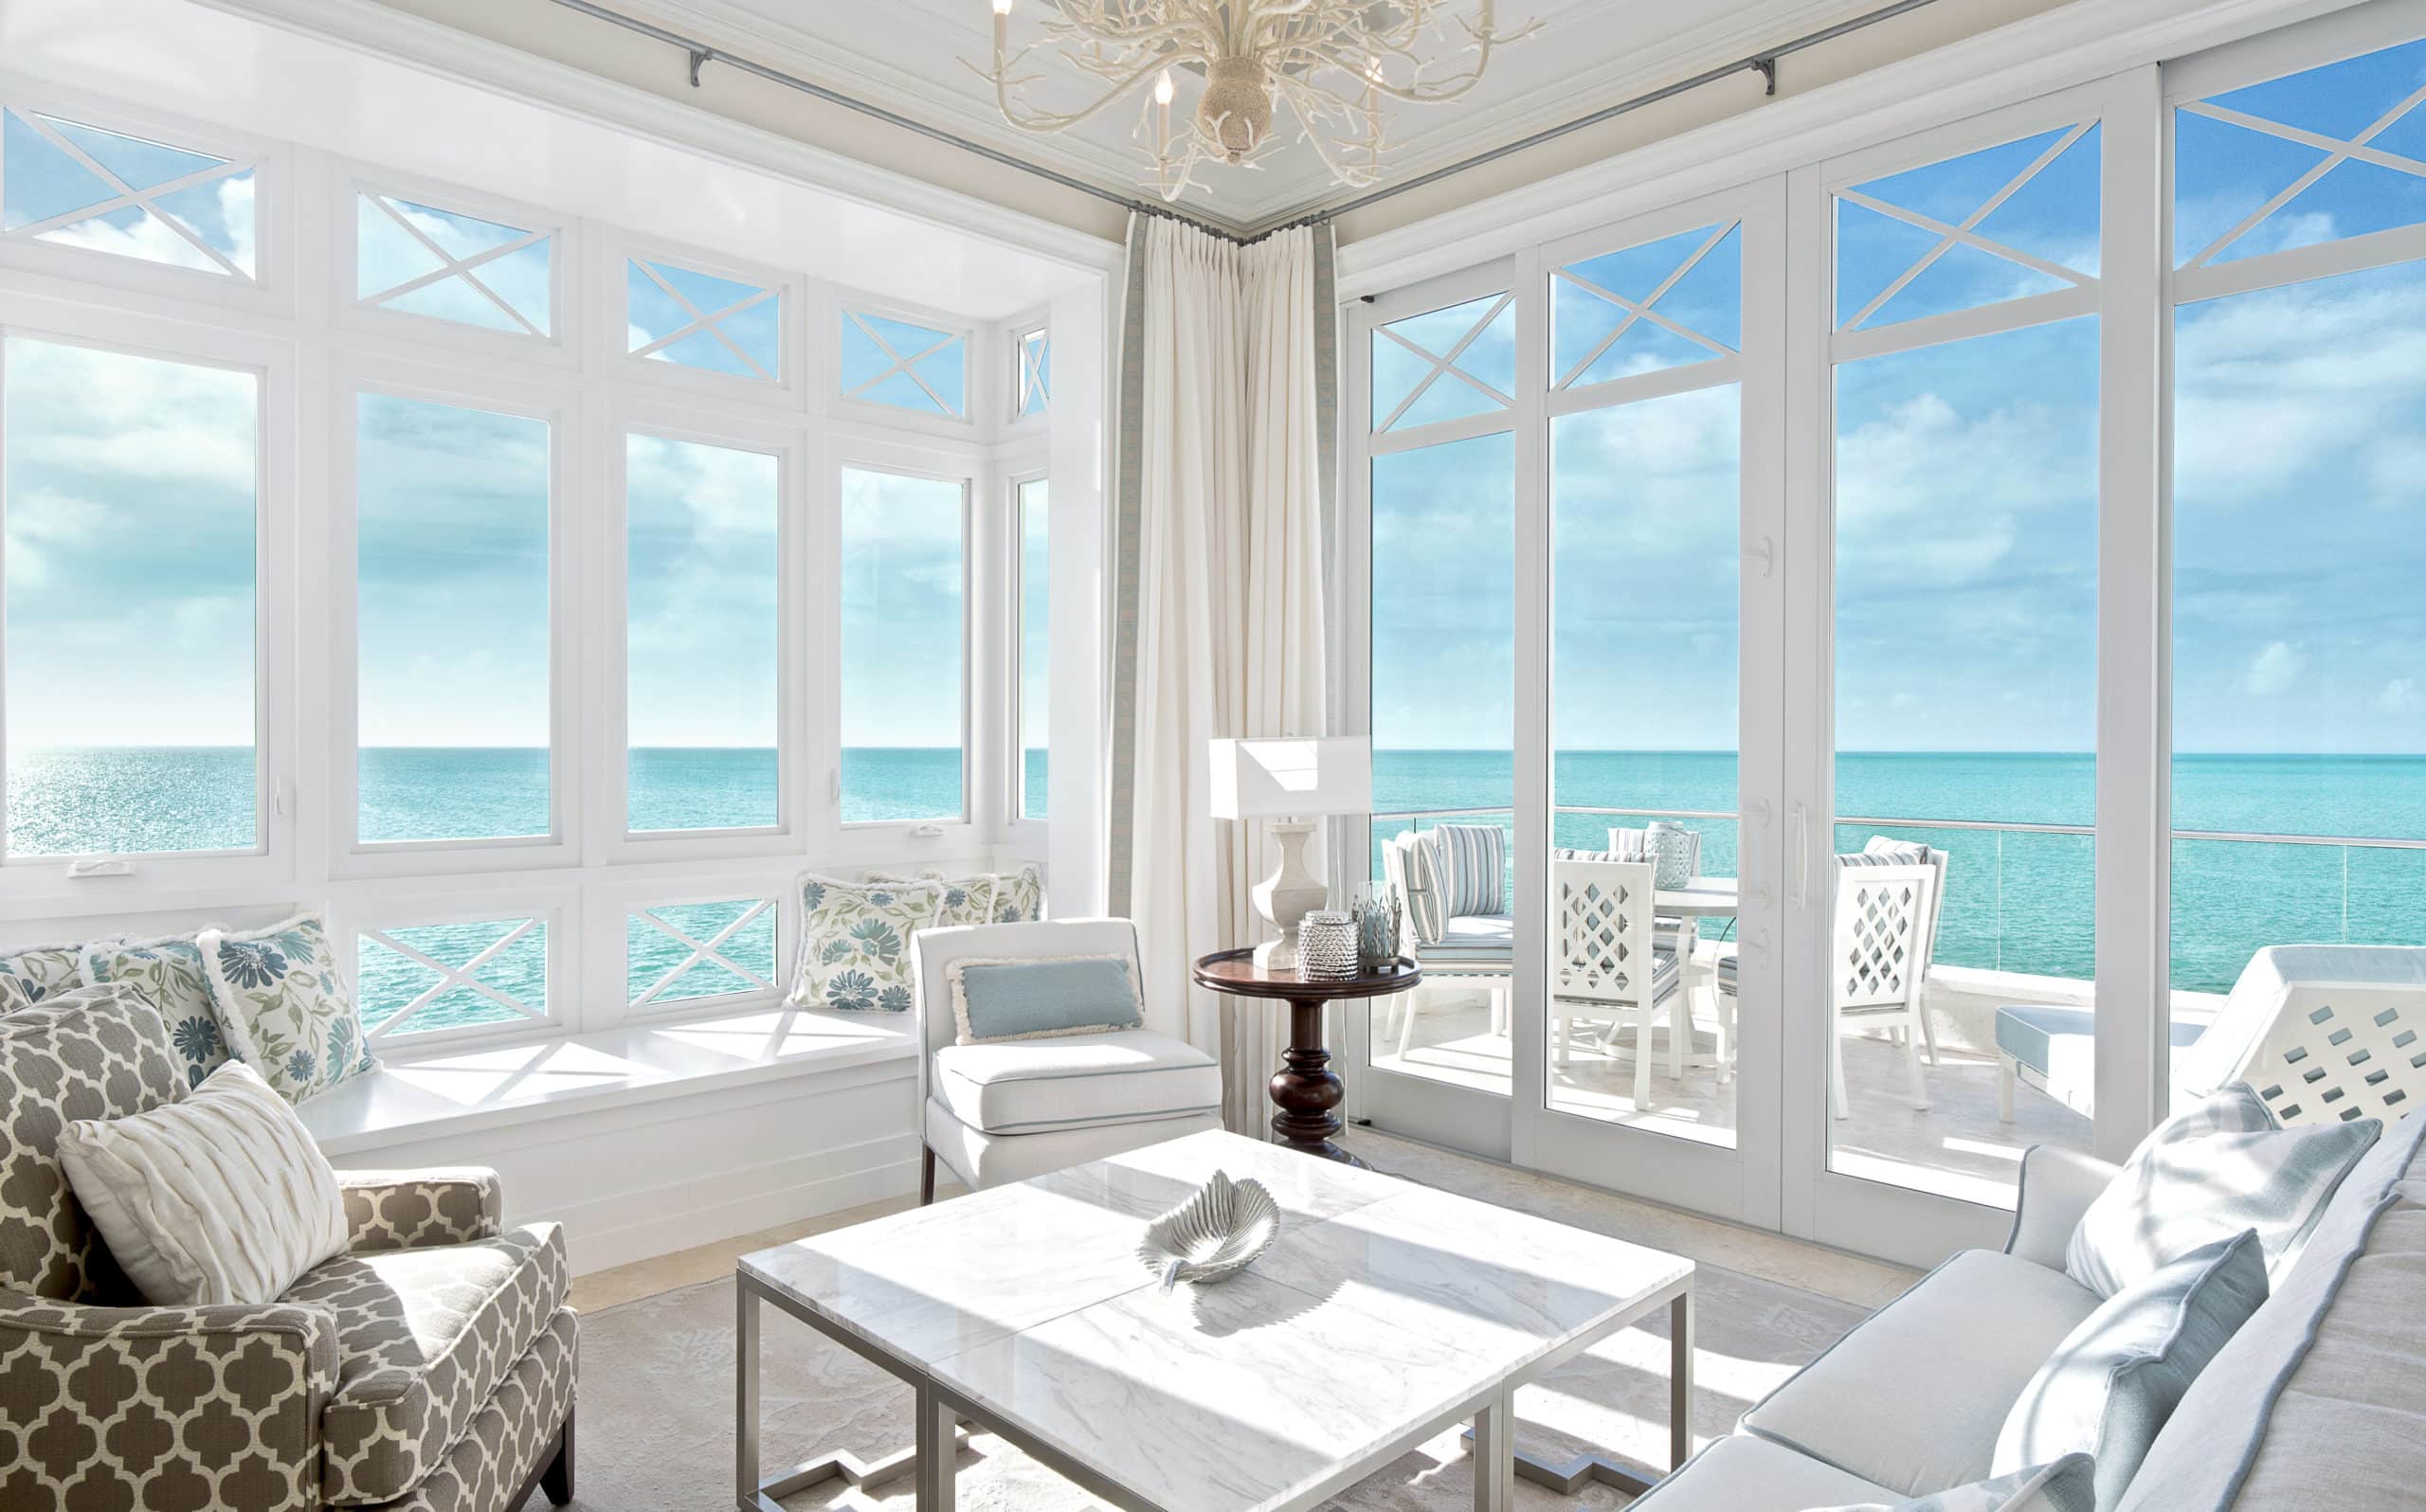 Room with white chairs and table and large windows overlooking the bright blue ocean.